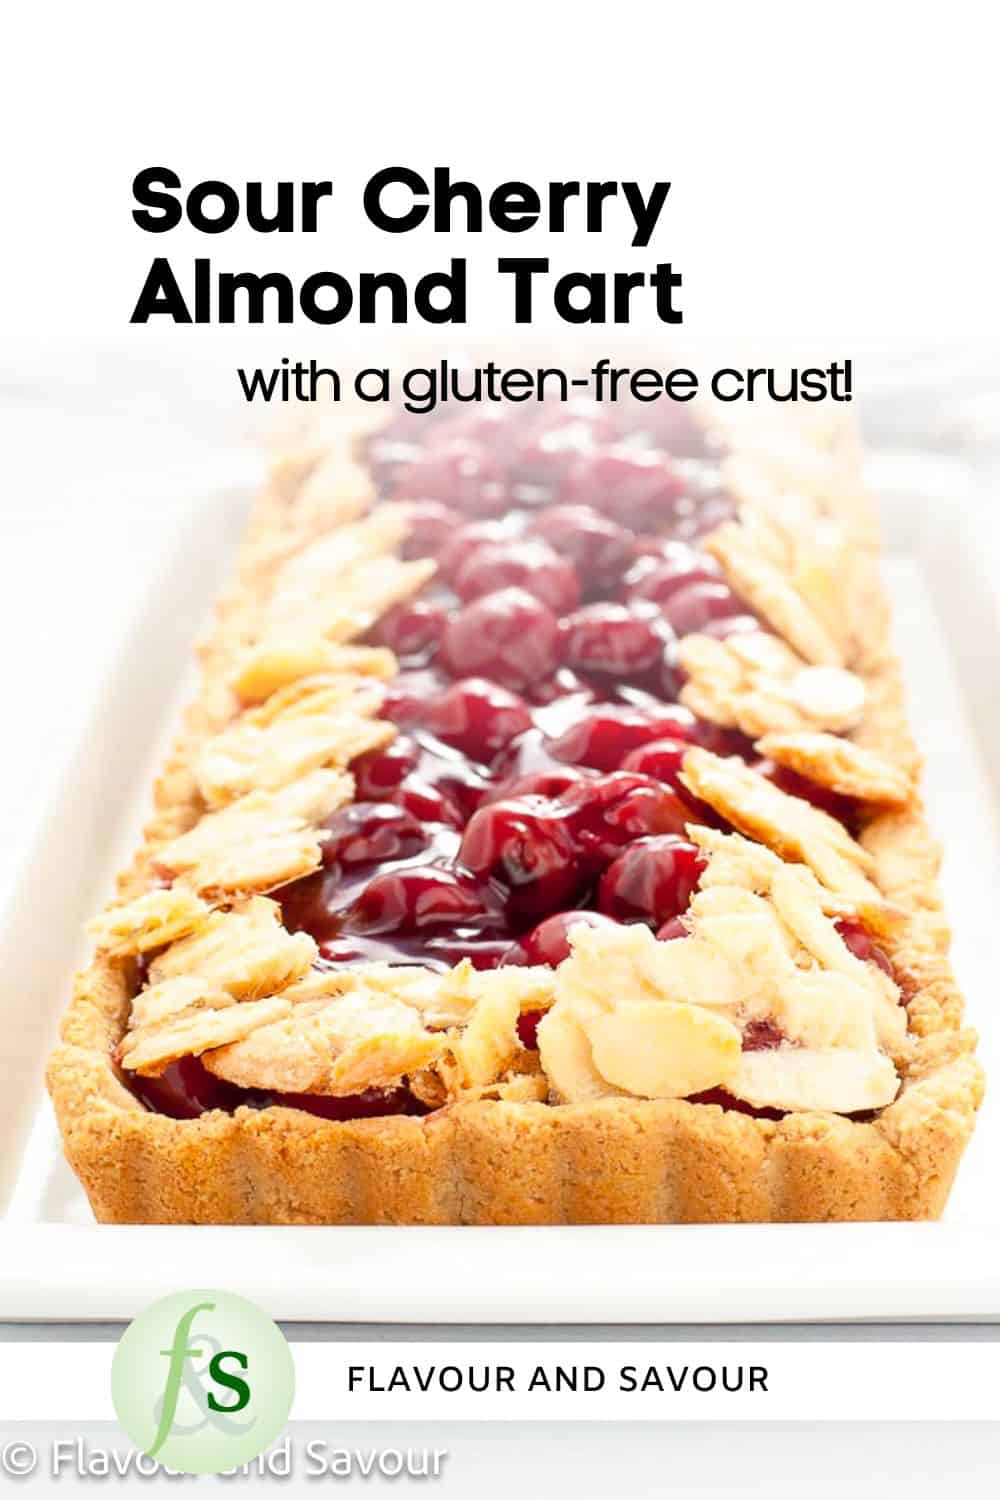 Image with text for gluten-free sour cherry almond tart.